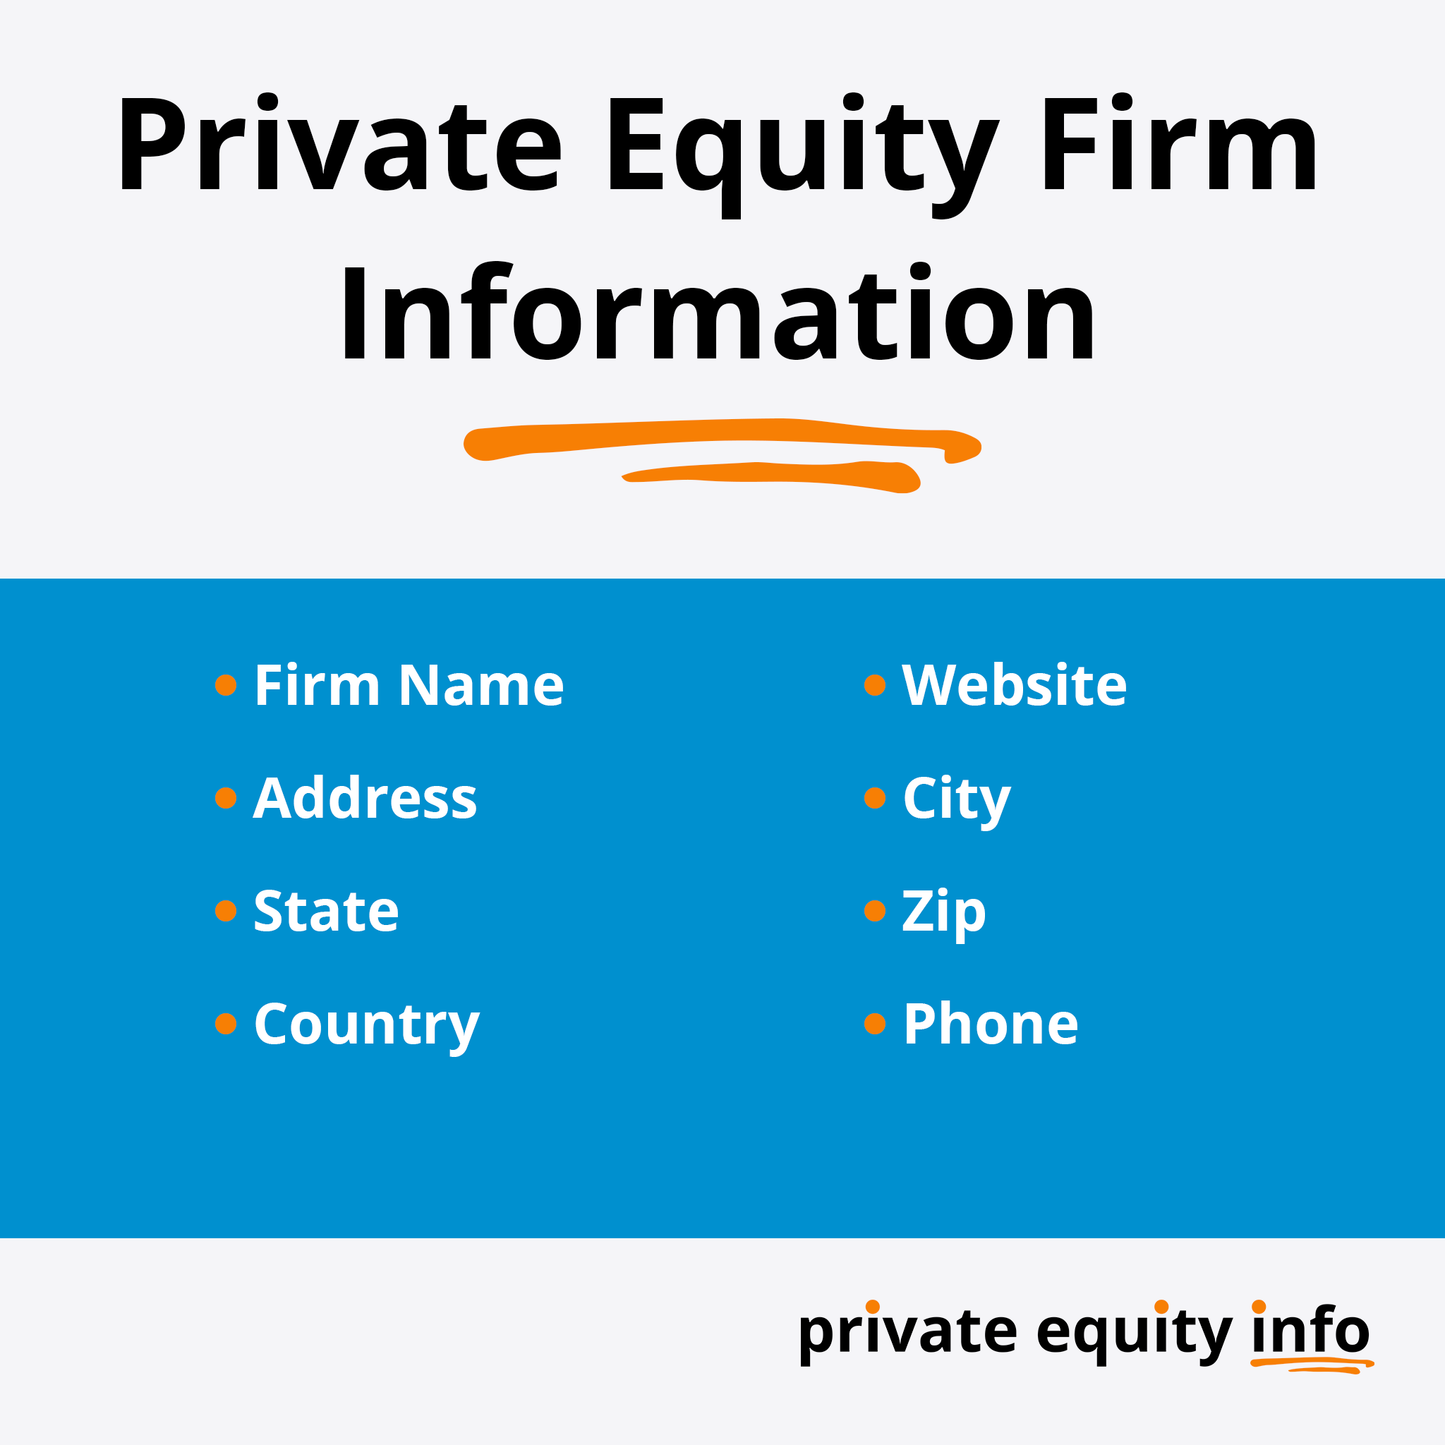 Private Equity Firms in New Jersey, Delaware and Maryland